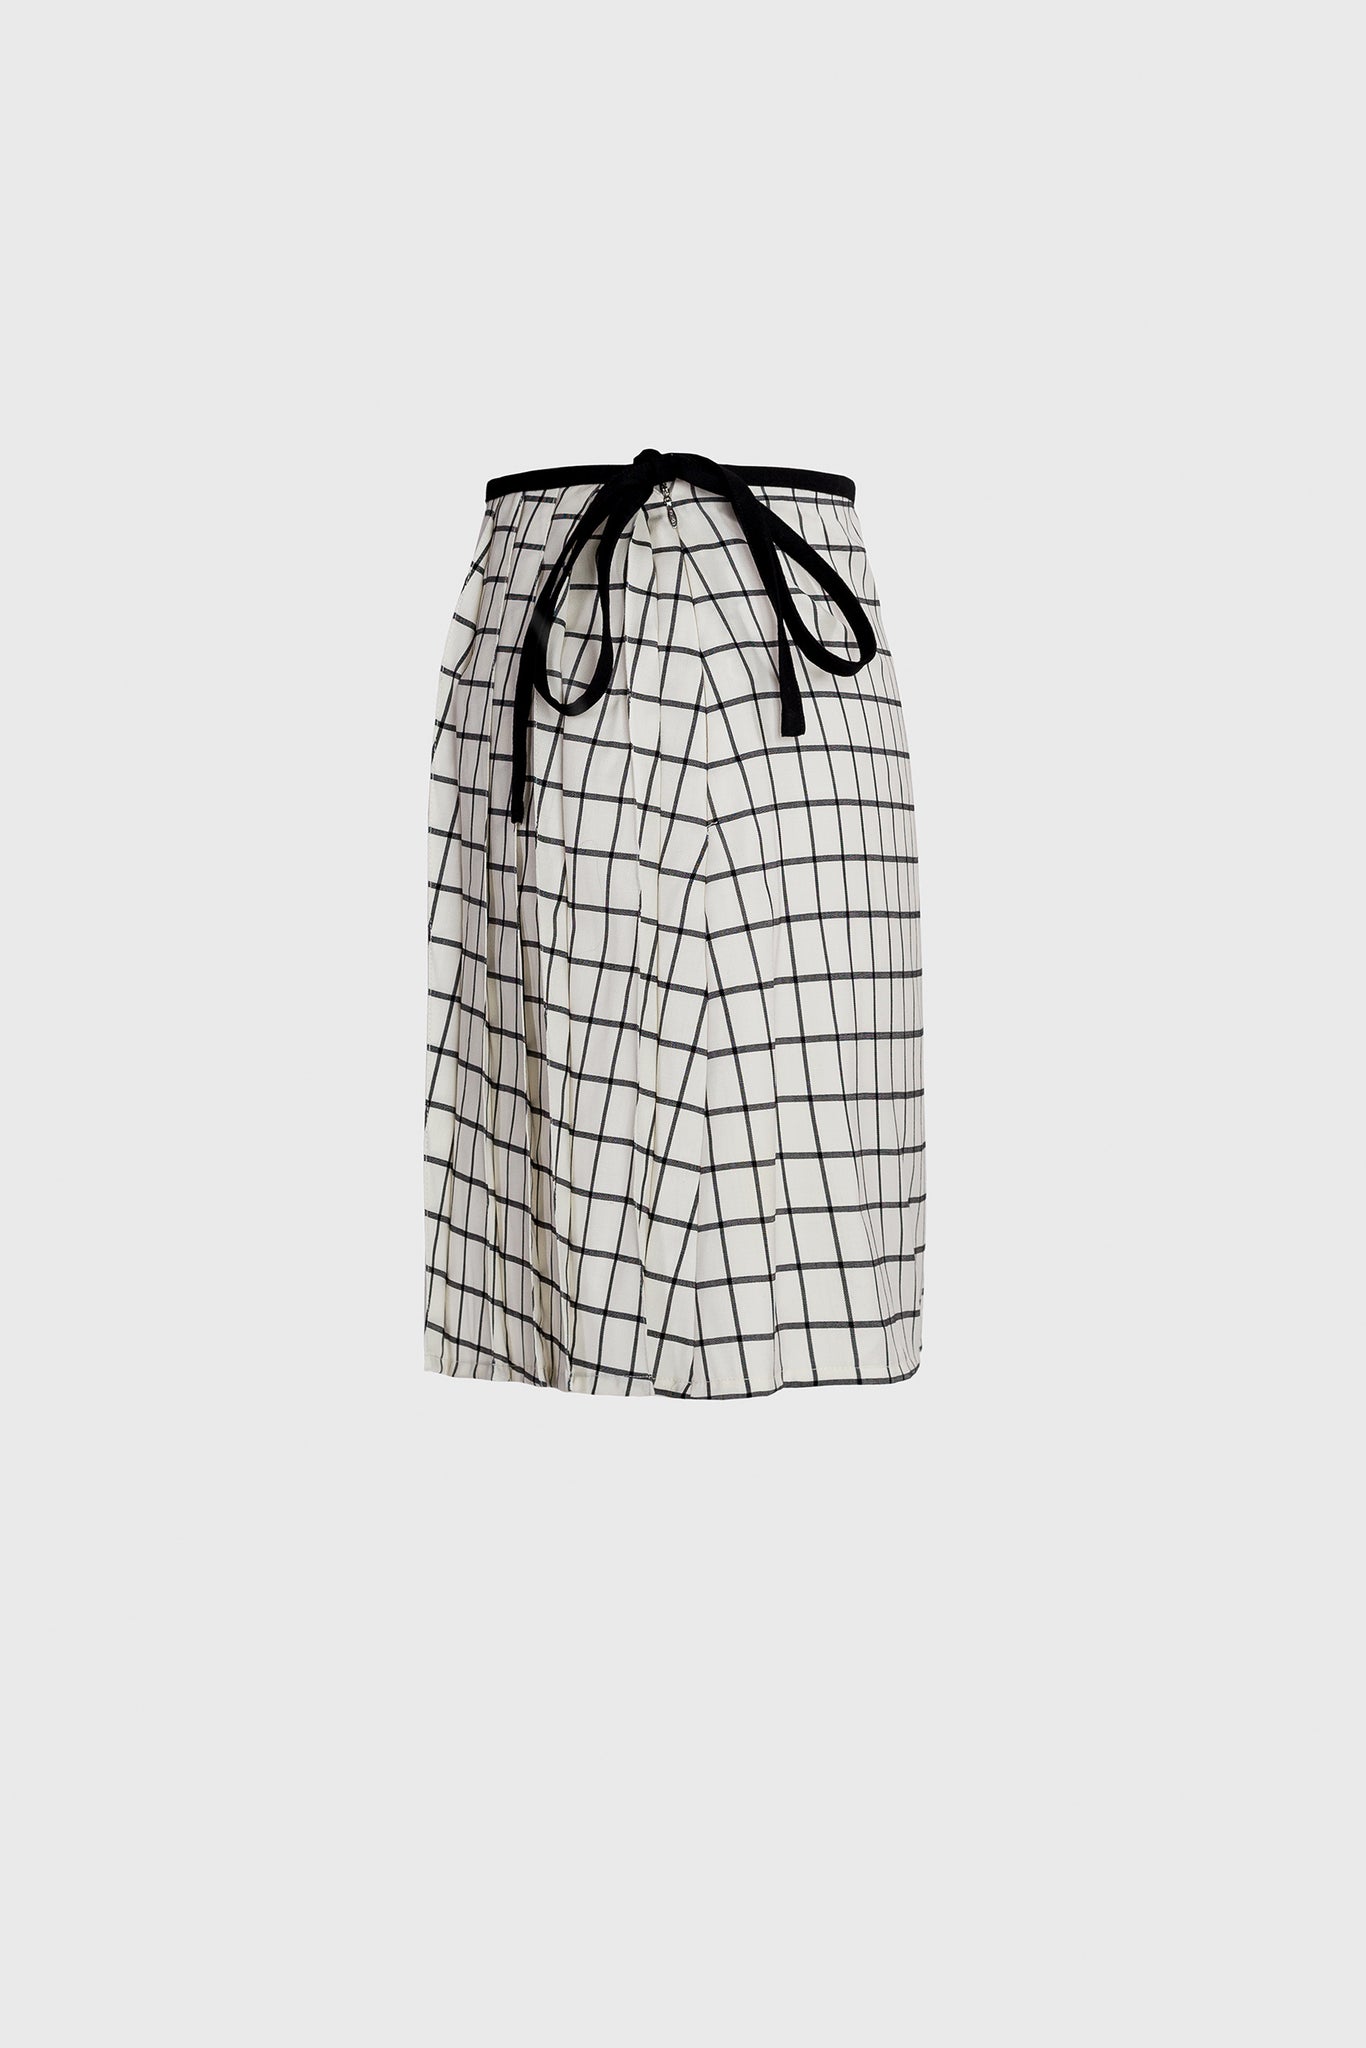 black and white geometric mini skirt, checked lines pattern, size zip fastening, above the knee, great for an elegant look, matching cuts on pleats, black lines on white, soft Italian wool, spring summer vibe